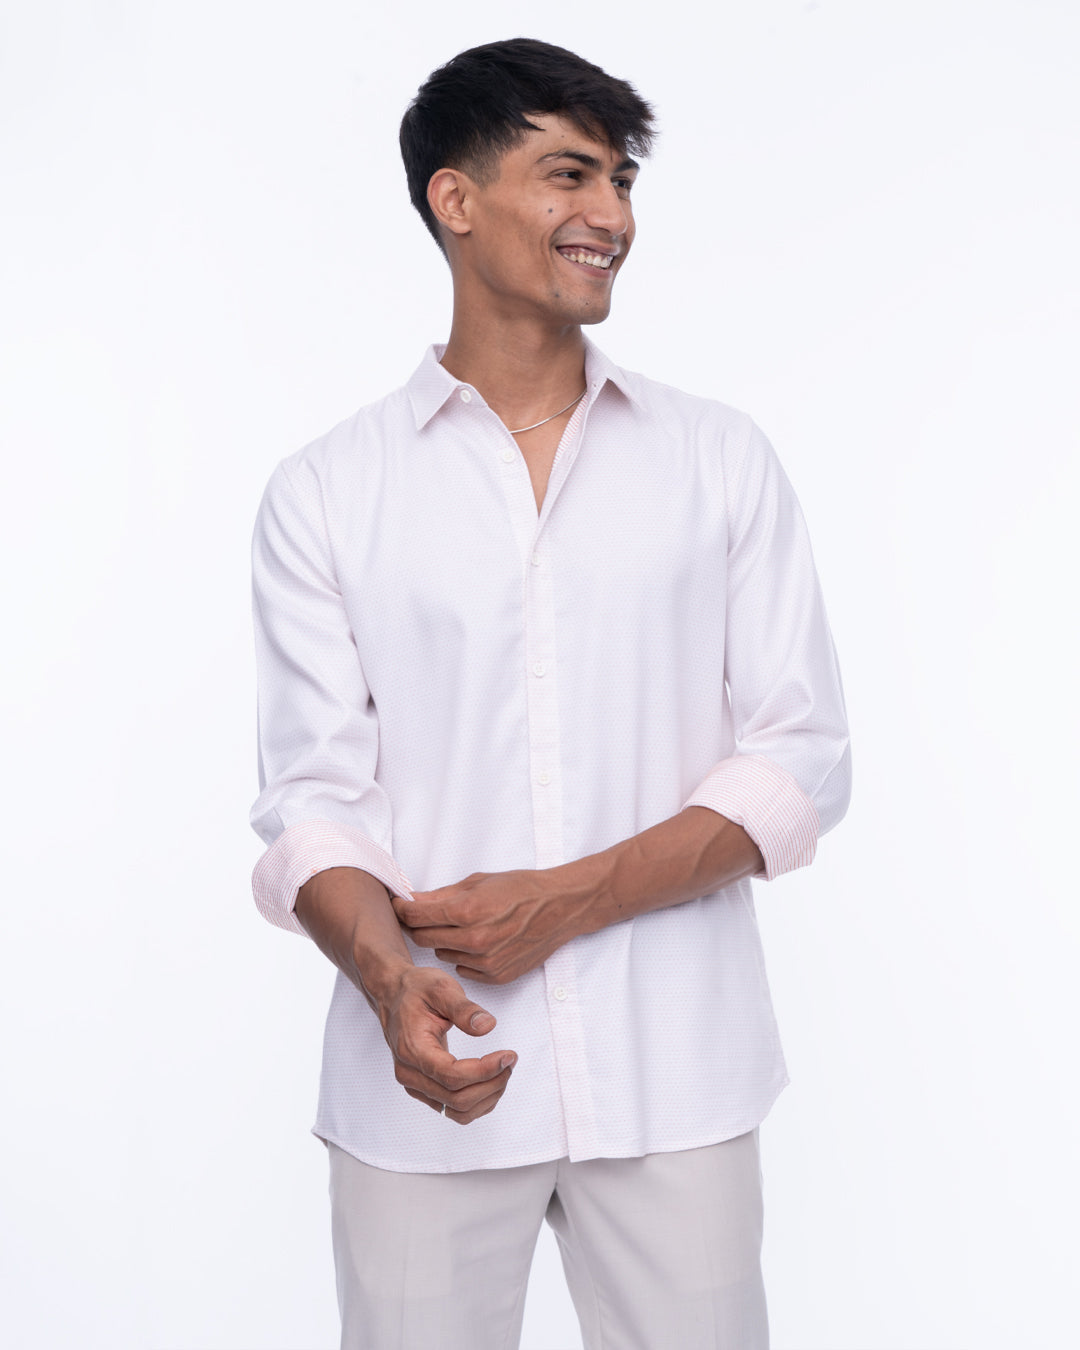 A smiling man stands against a white background, wearing a light pink cotton shirt with the sleeves rolled up and light gray pants. This Ivory - Classic Shirt is perfect for everyday wear as he looks to his right, with his hands relaxed in front of him.